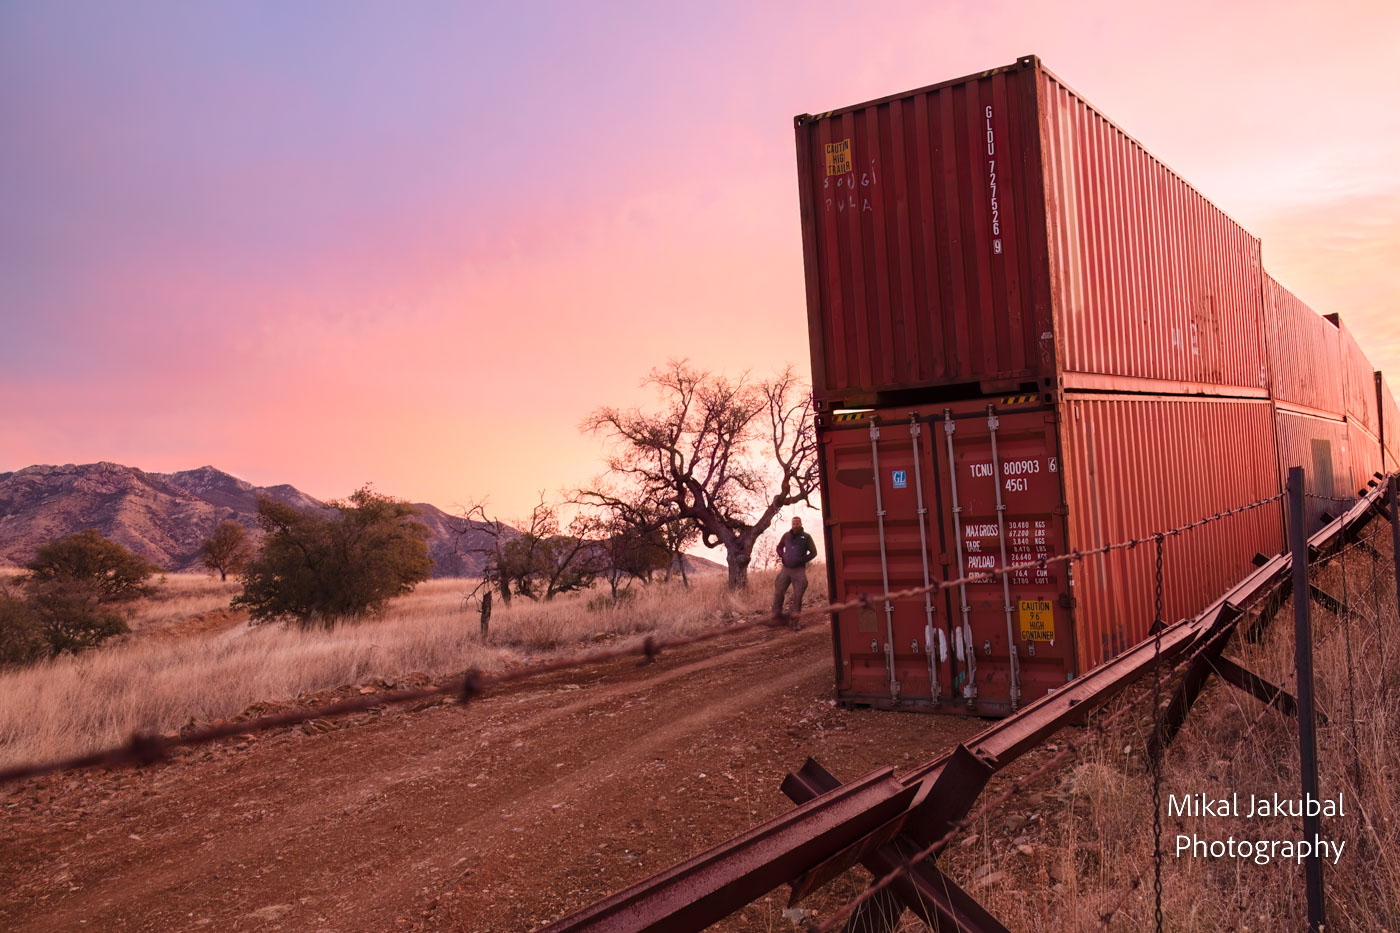 At dawn the sky is red, pink and purple. To the left in the background is a grassland with oak trees and mountains in the distance. In the center of the frame is a line of double-stacked red shipping containers. To the right of that is a barbed wire fence and a vehicle barrier made of welded railroad rails. At the left edge of the containers is a shadowed human figure against the skyline, hands in pockets looking at the camera.